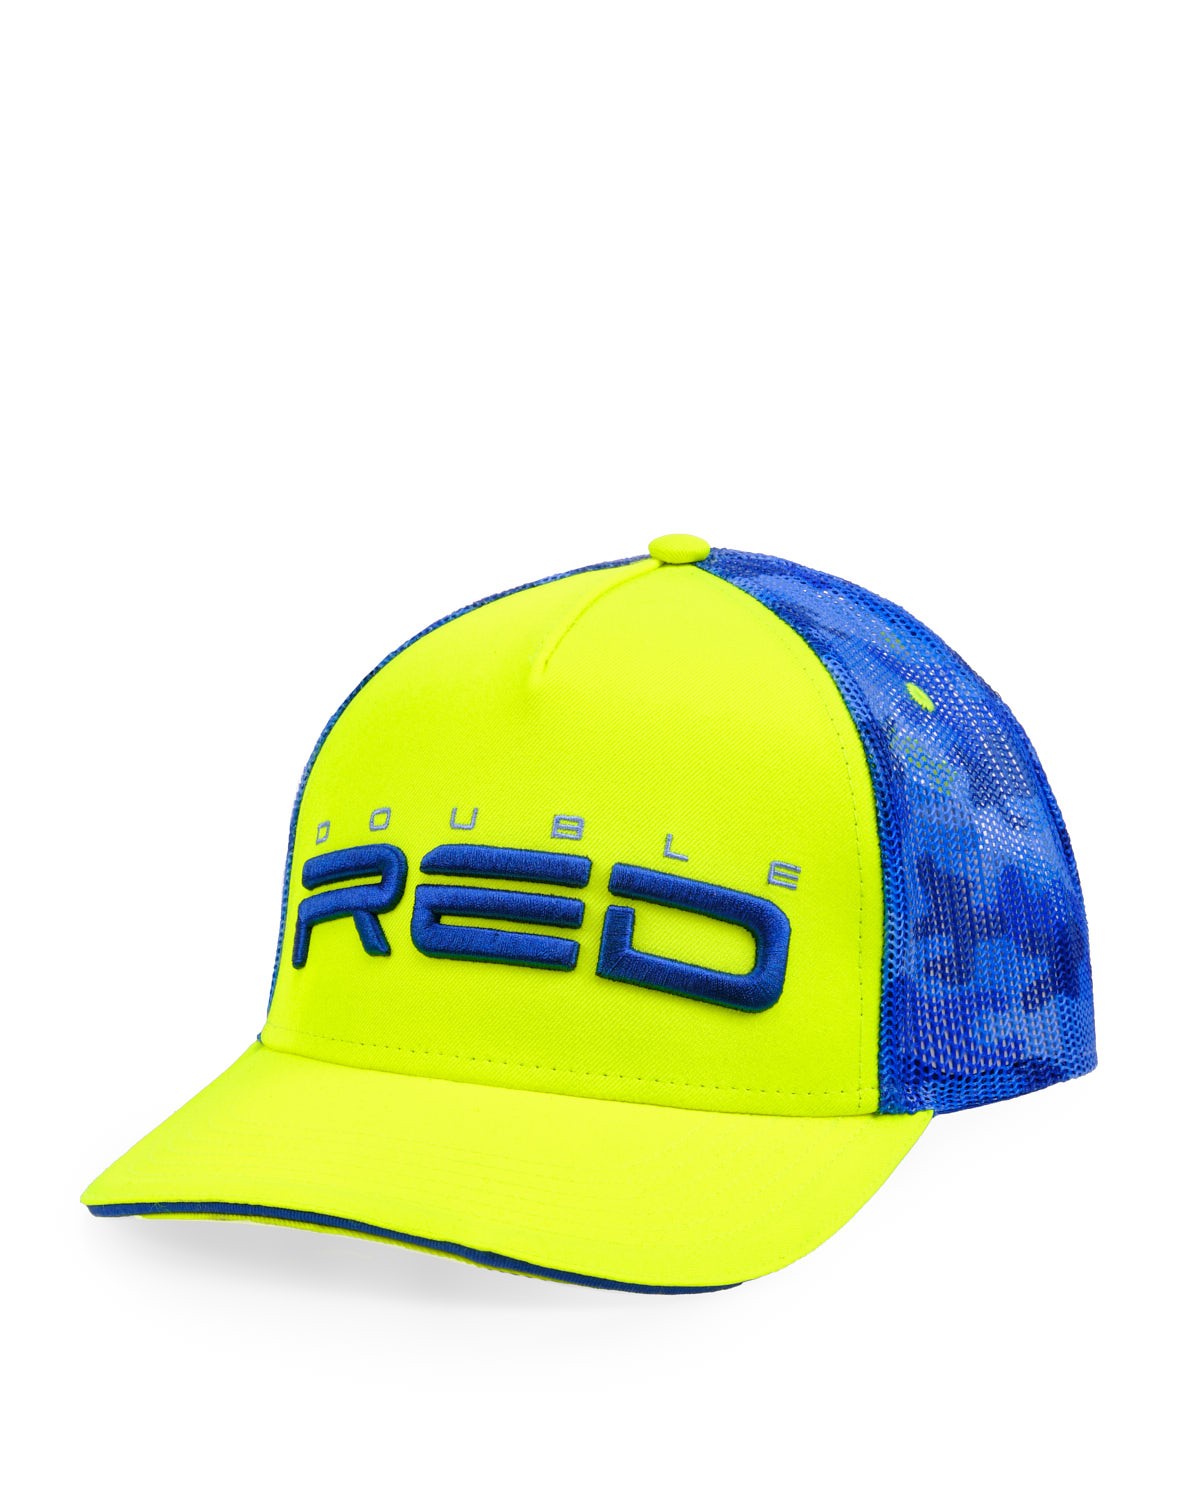 NEON STREETS COLLECTION Cap Yellow